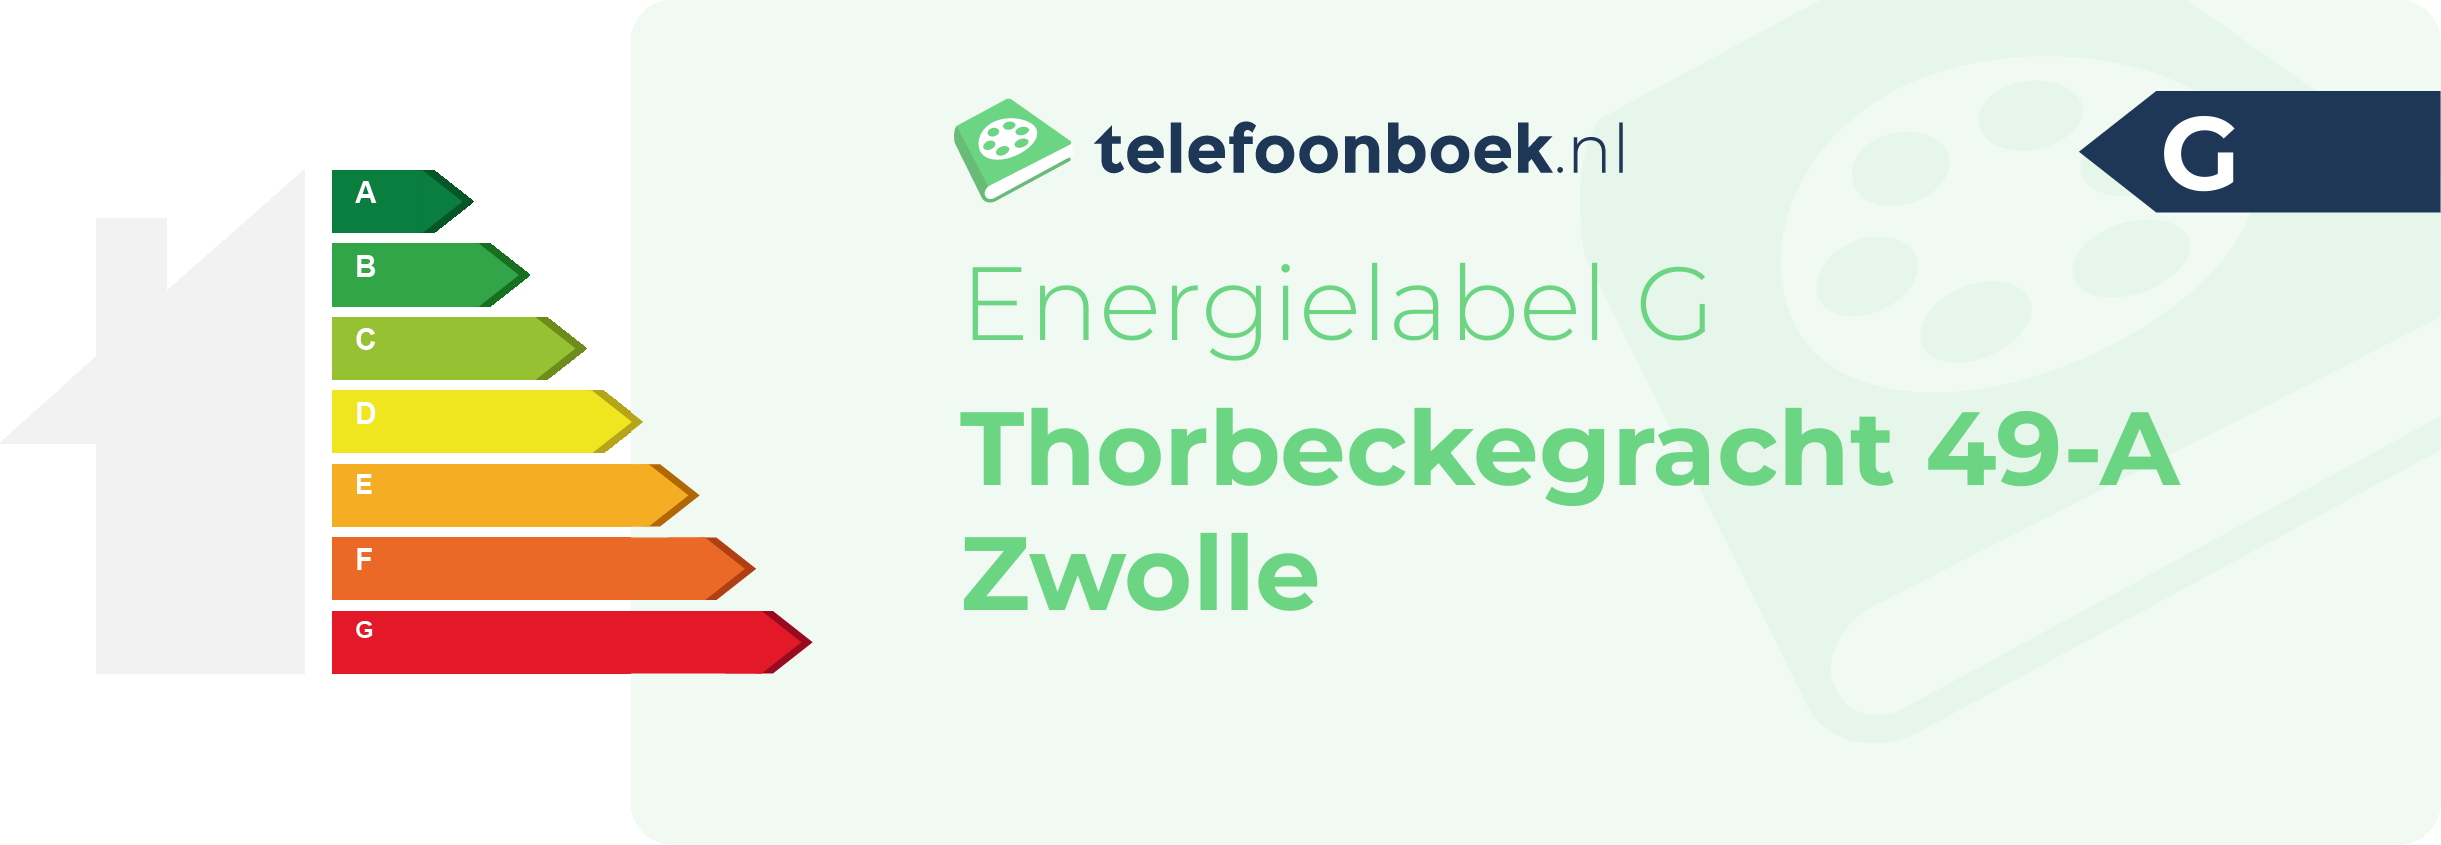 Energielabel Thorbeckegracht 49-A Zwolle